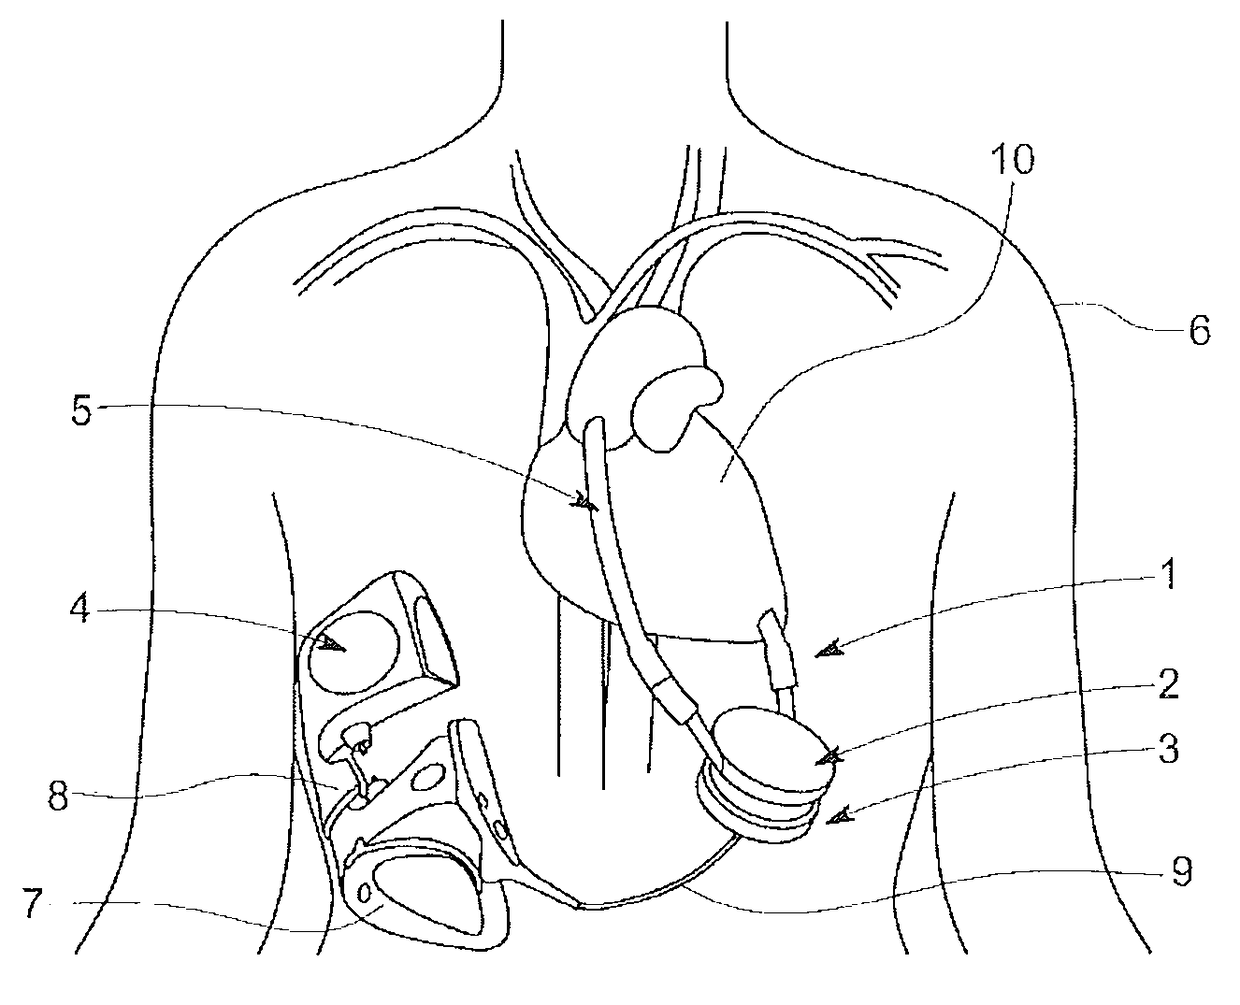 Low cost ventricular device and system thereof